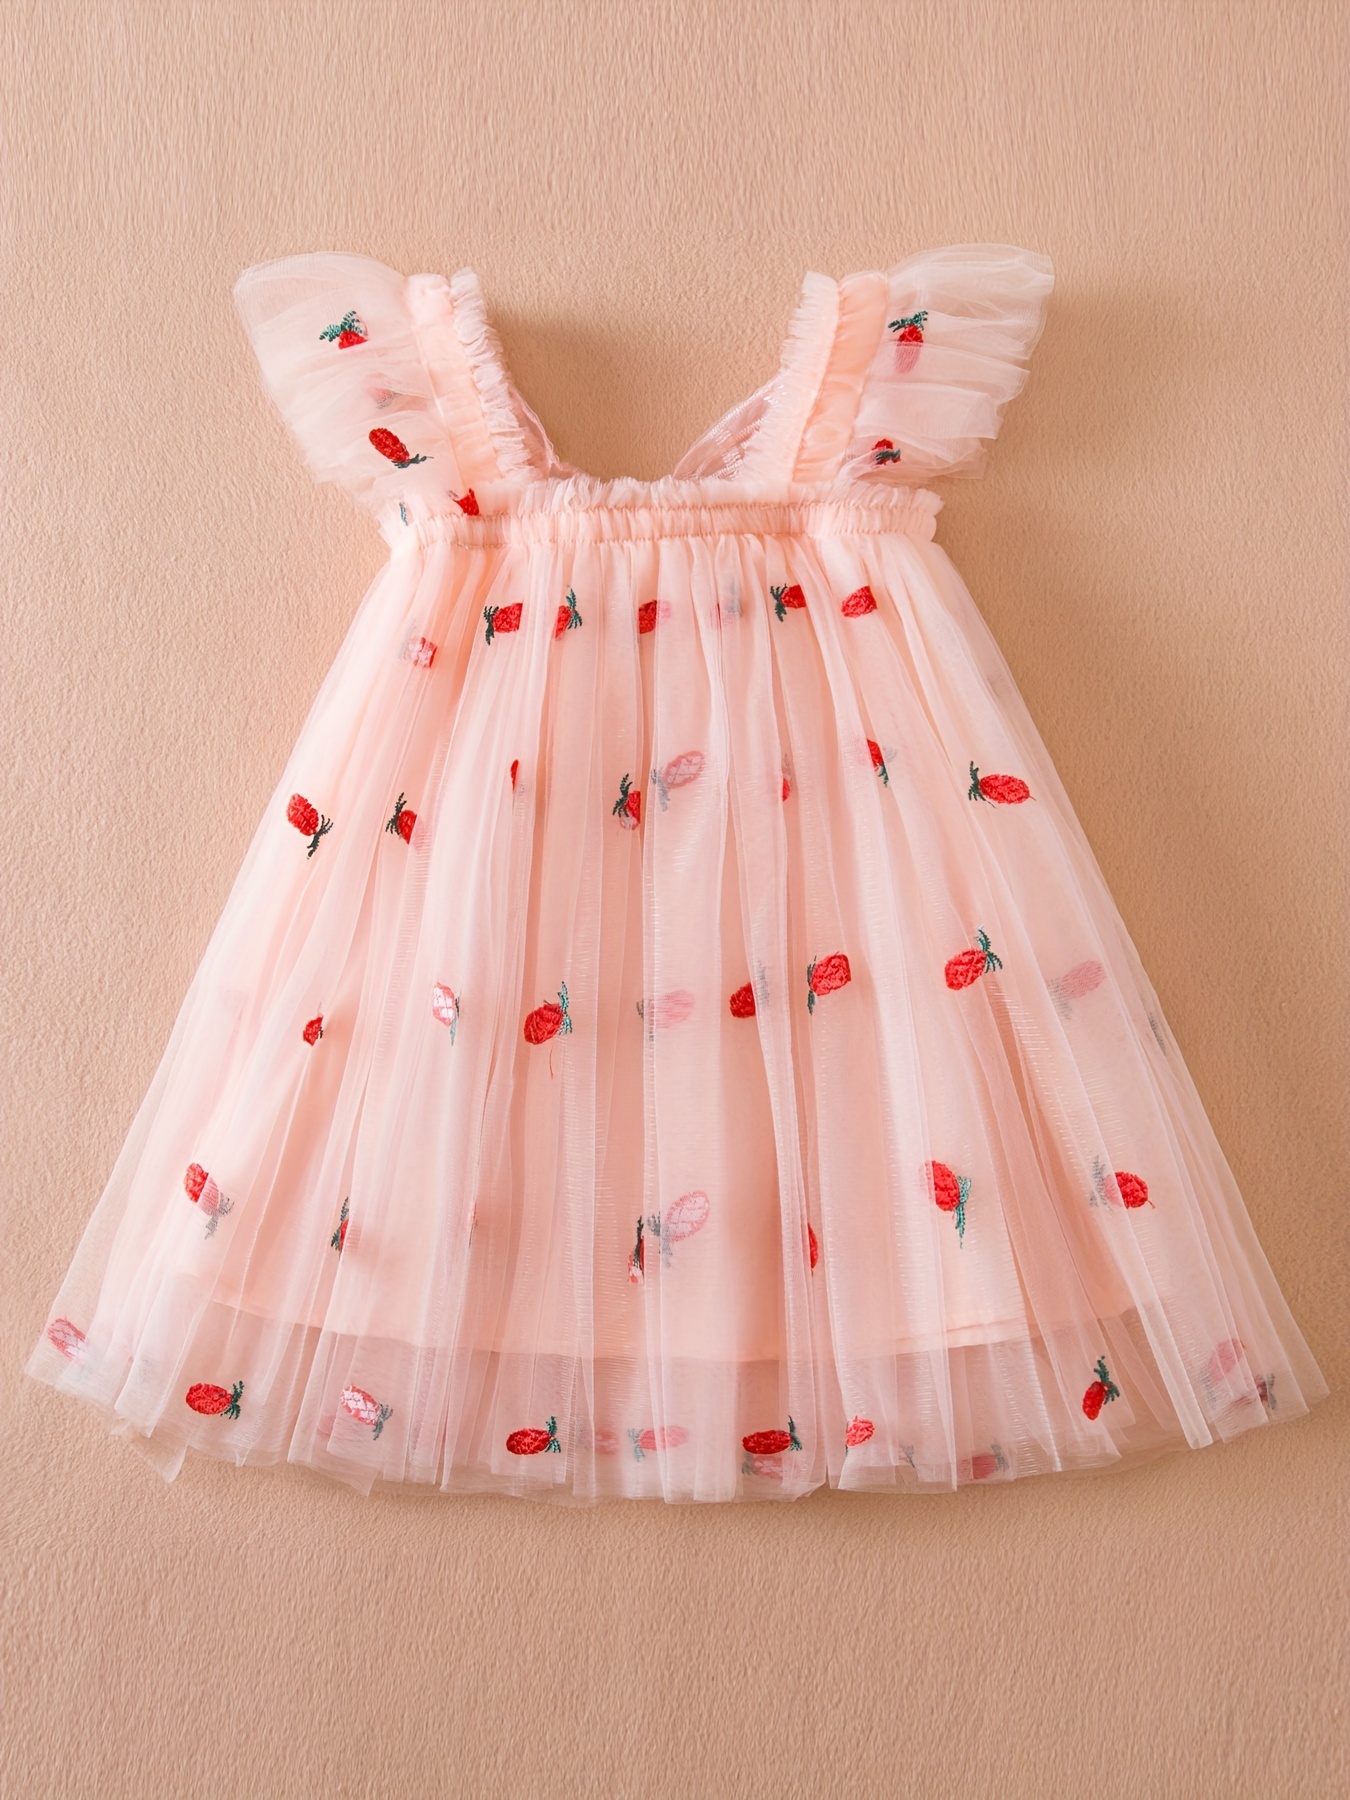 Toddler Baby Kids Girls Strawberry Ruched Dress Princess Dresses Clothes